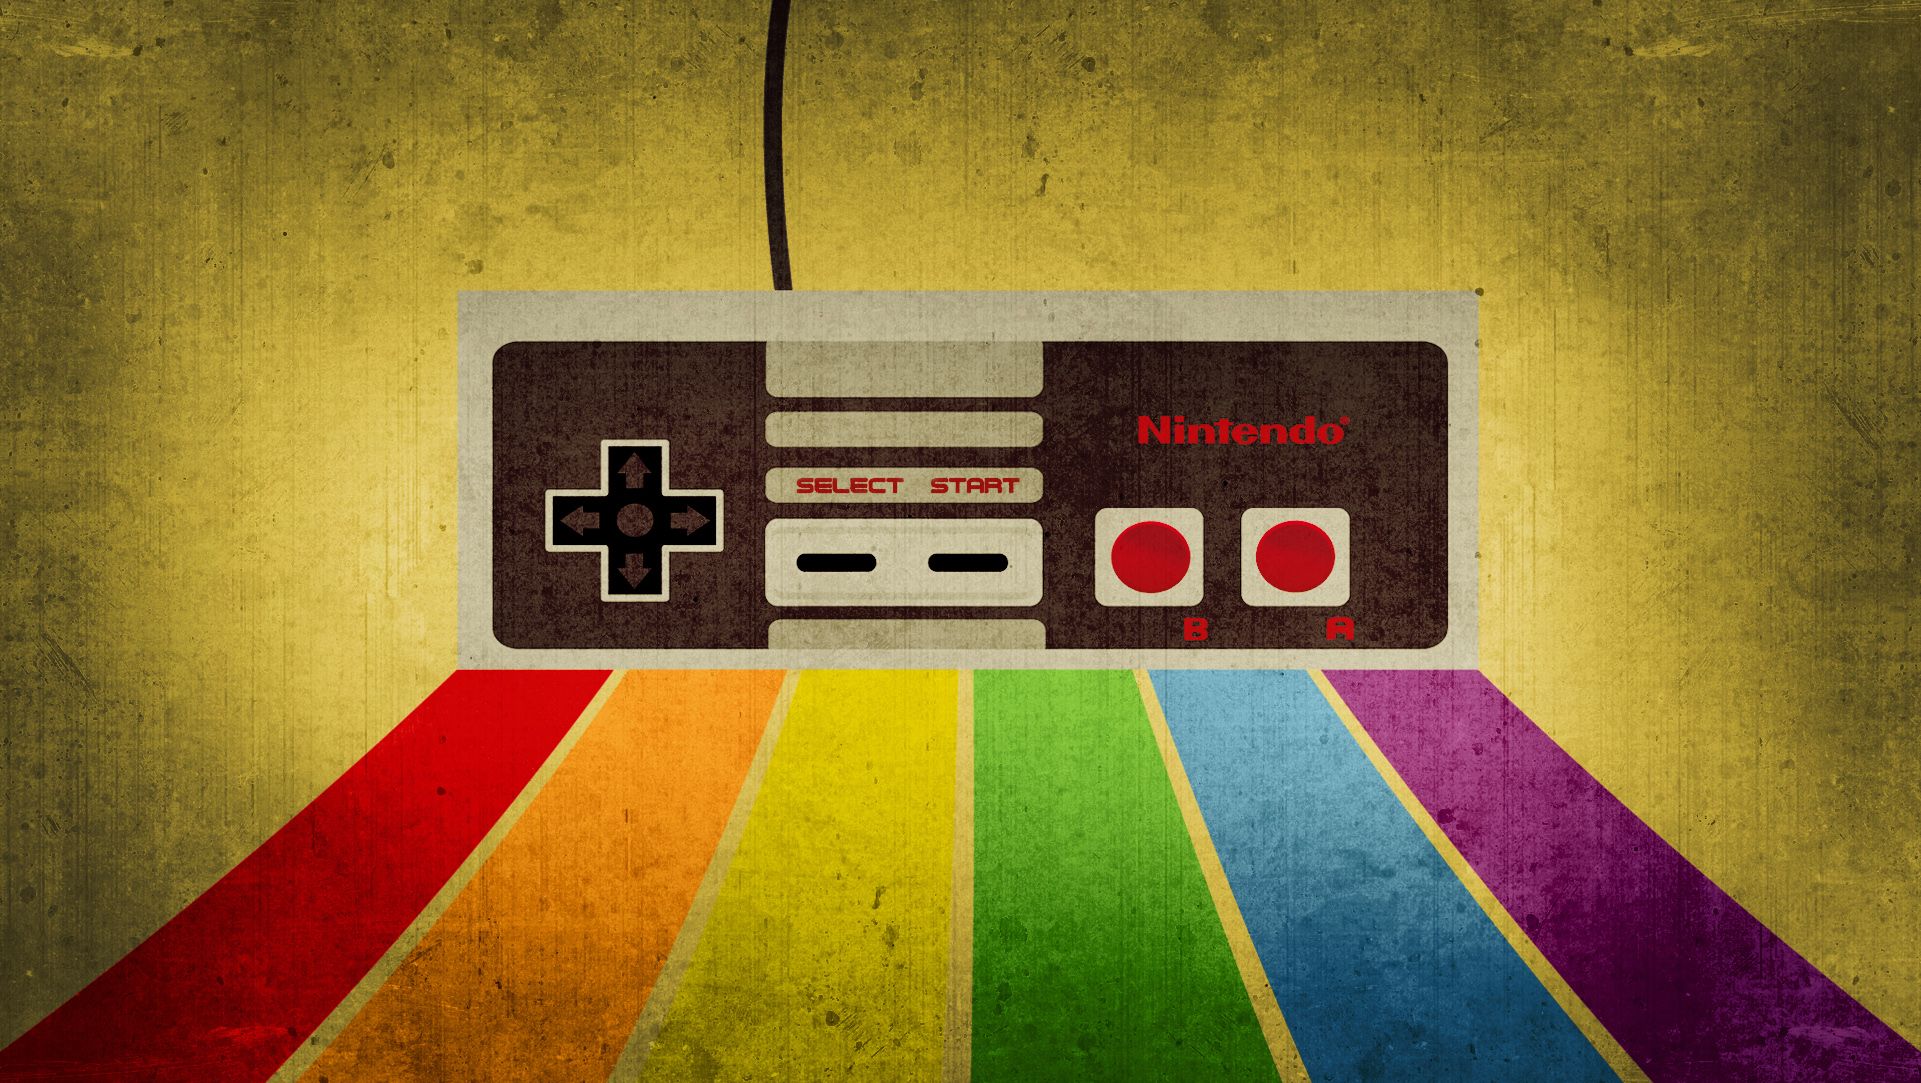 Awesome Retro Gaming Background. Awesome Wallpaper, Awesome Background and Awesome Minecraft Wallpaper